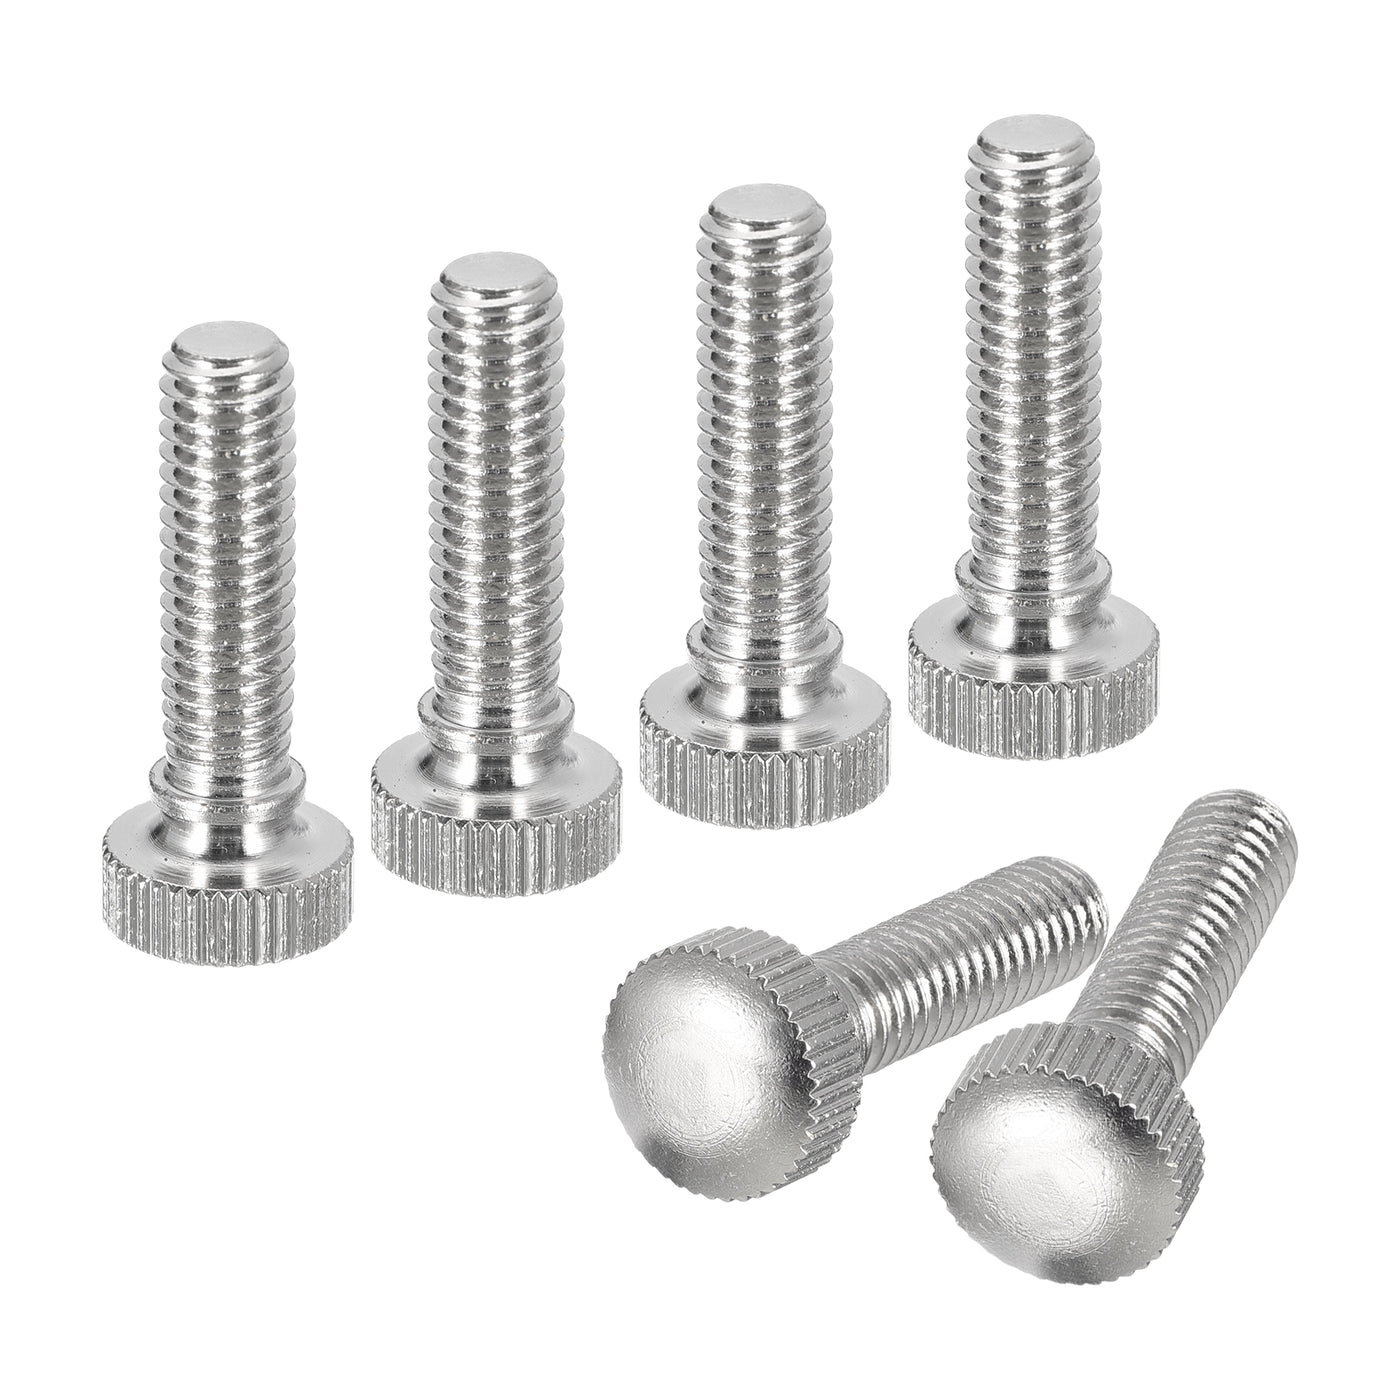 uxcell Uxcell M6x20mm Knurled Thumb Screws, 6pcs Brass Thumb Screws with Shoulder, Silver Tone